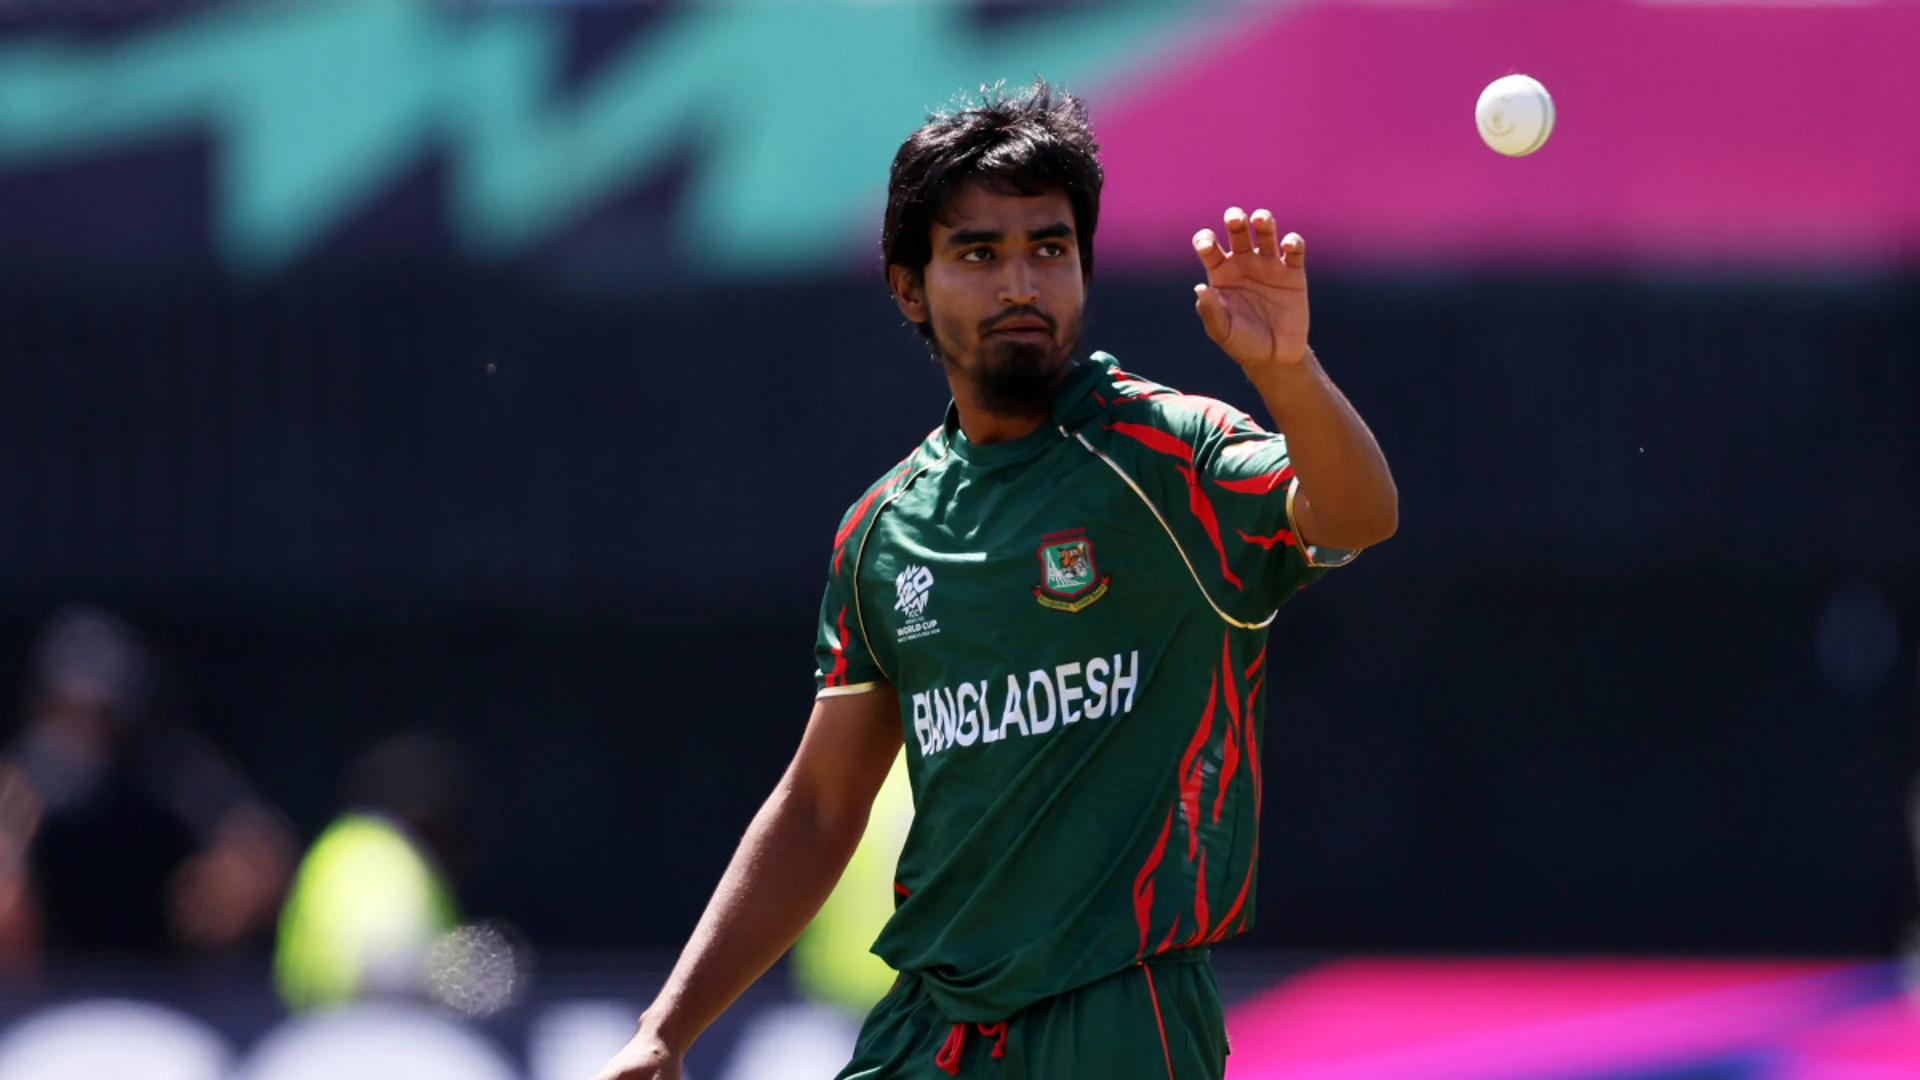 Bangladesh pacer Tanzim fined for 'contact' with Nepal captain